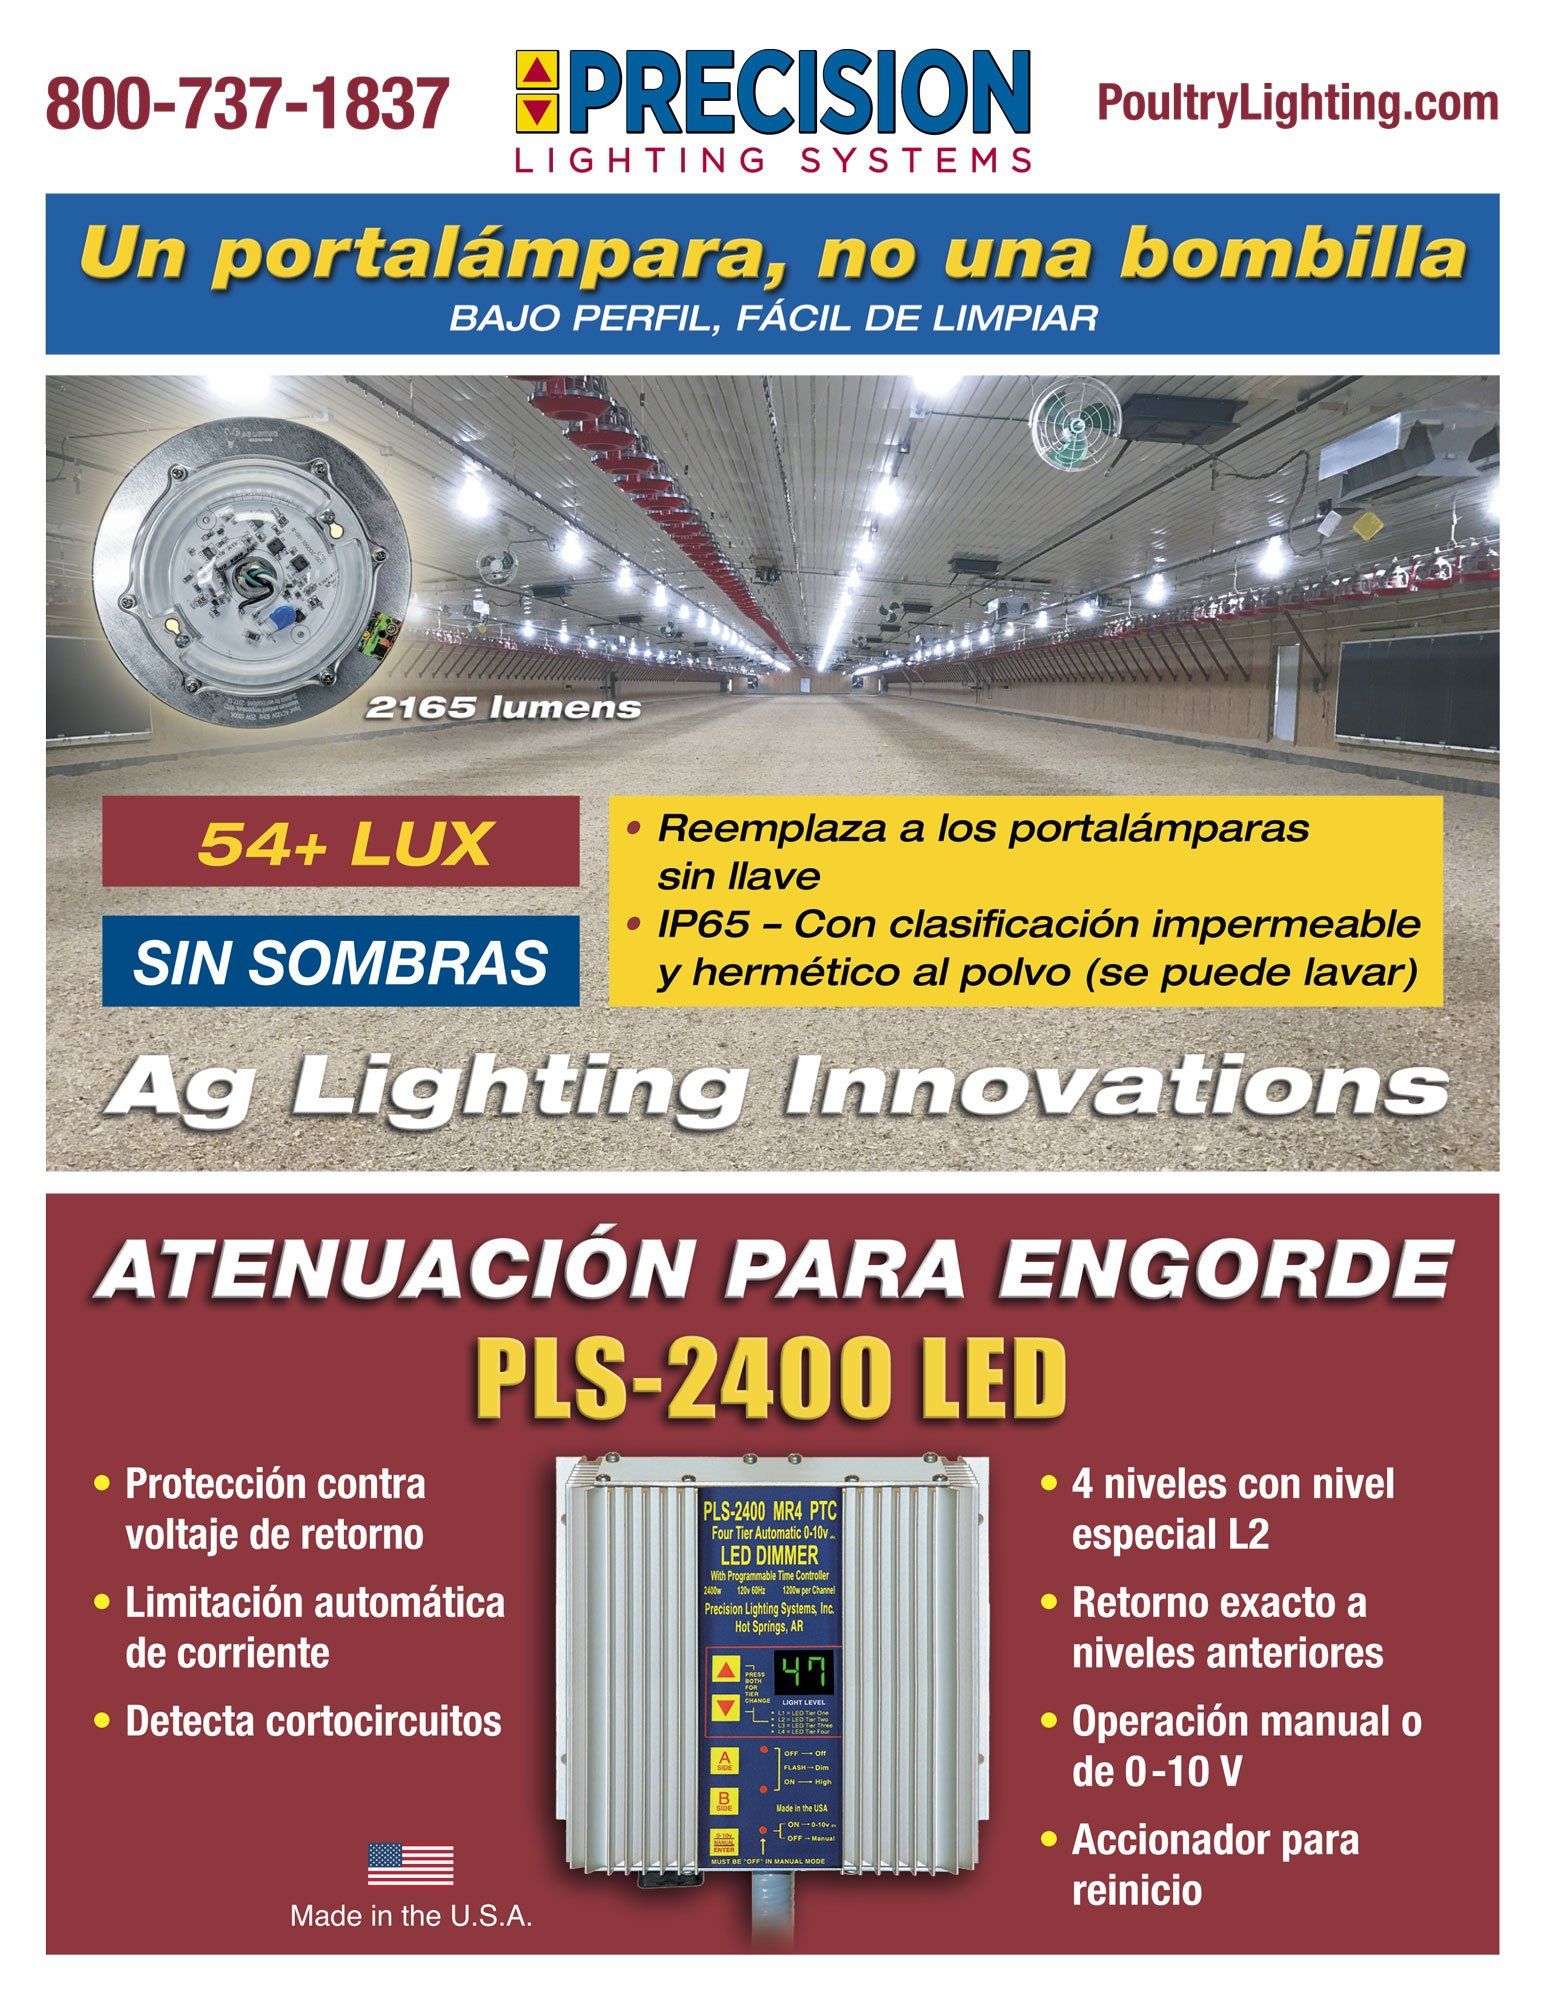 An advertisement for precision lighting systems in spanish